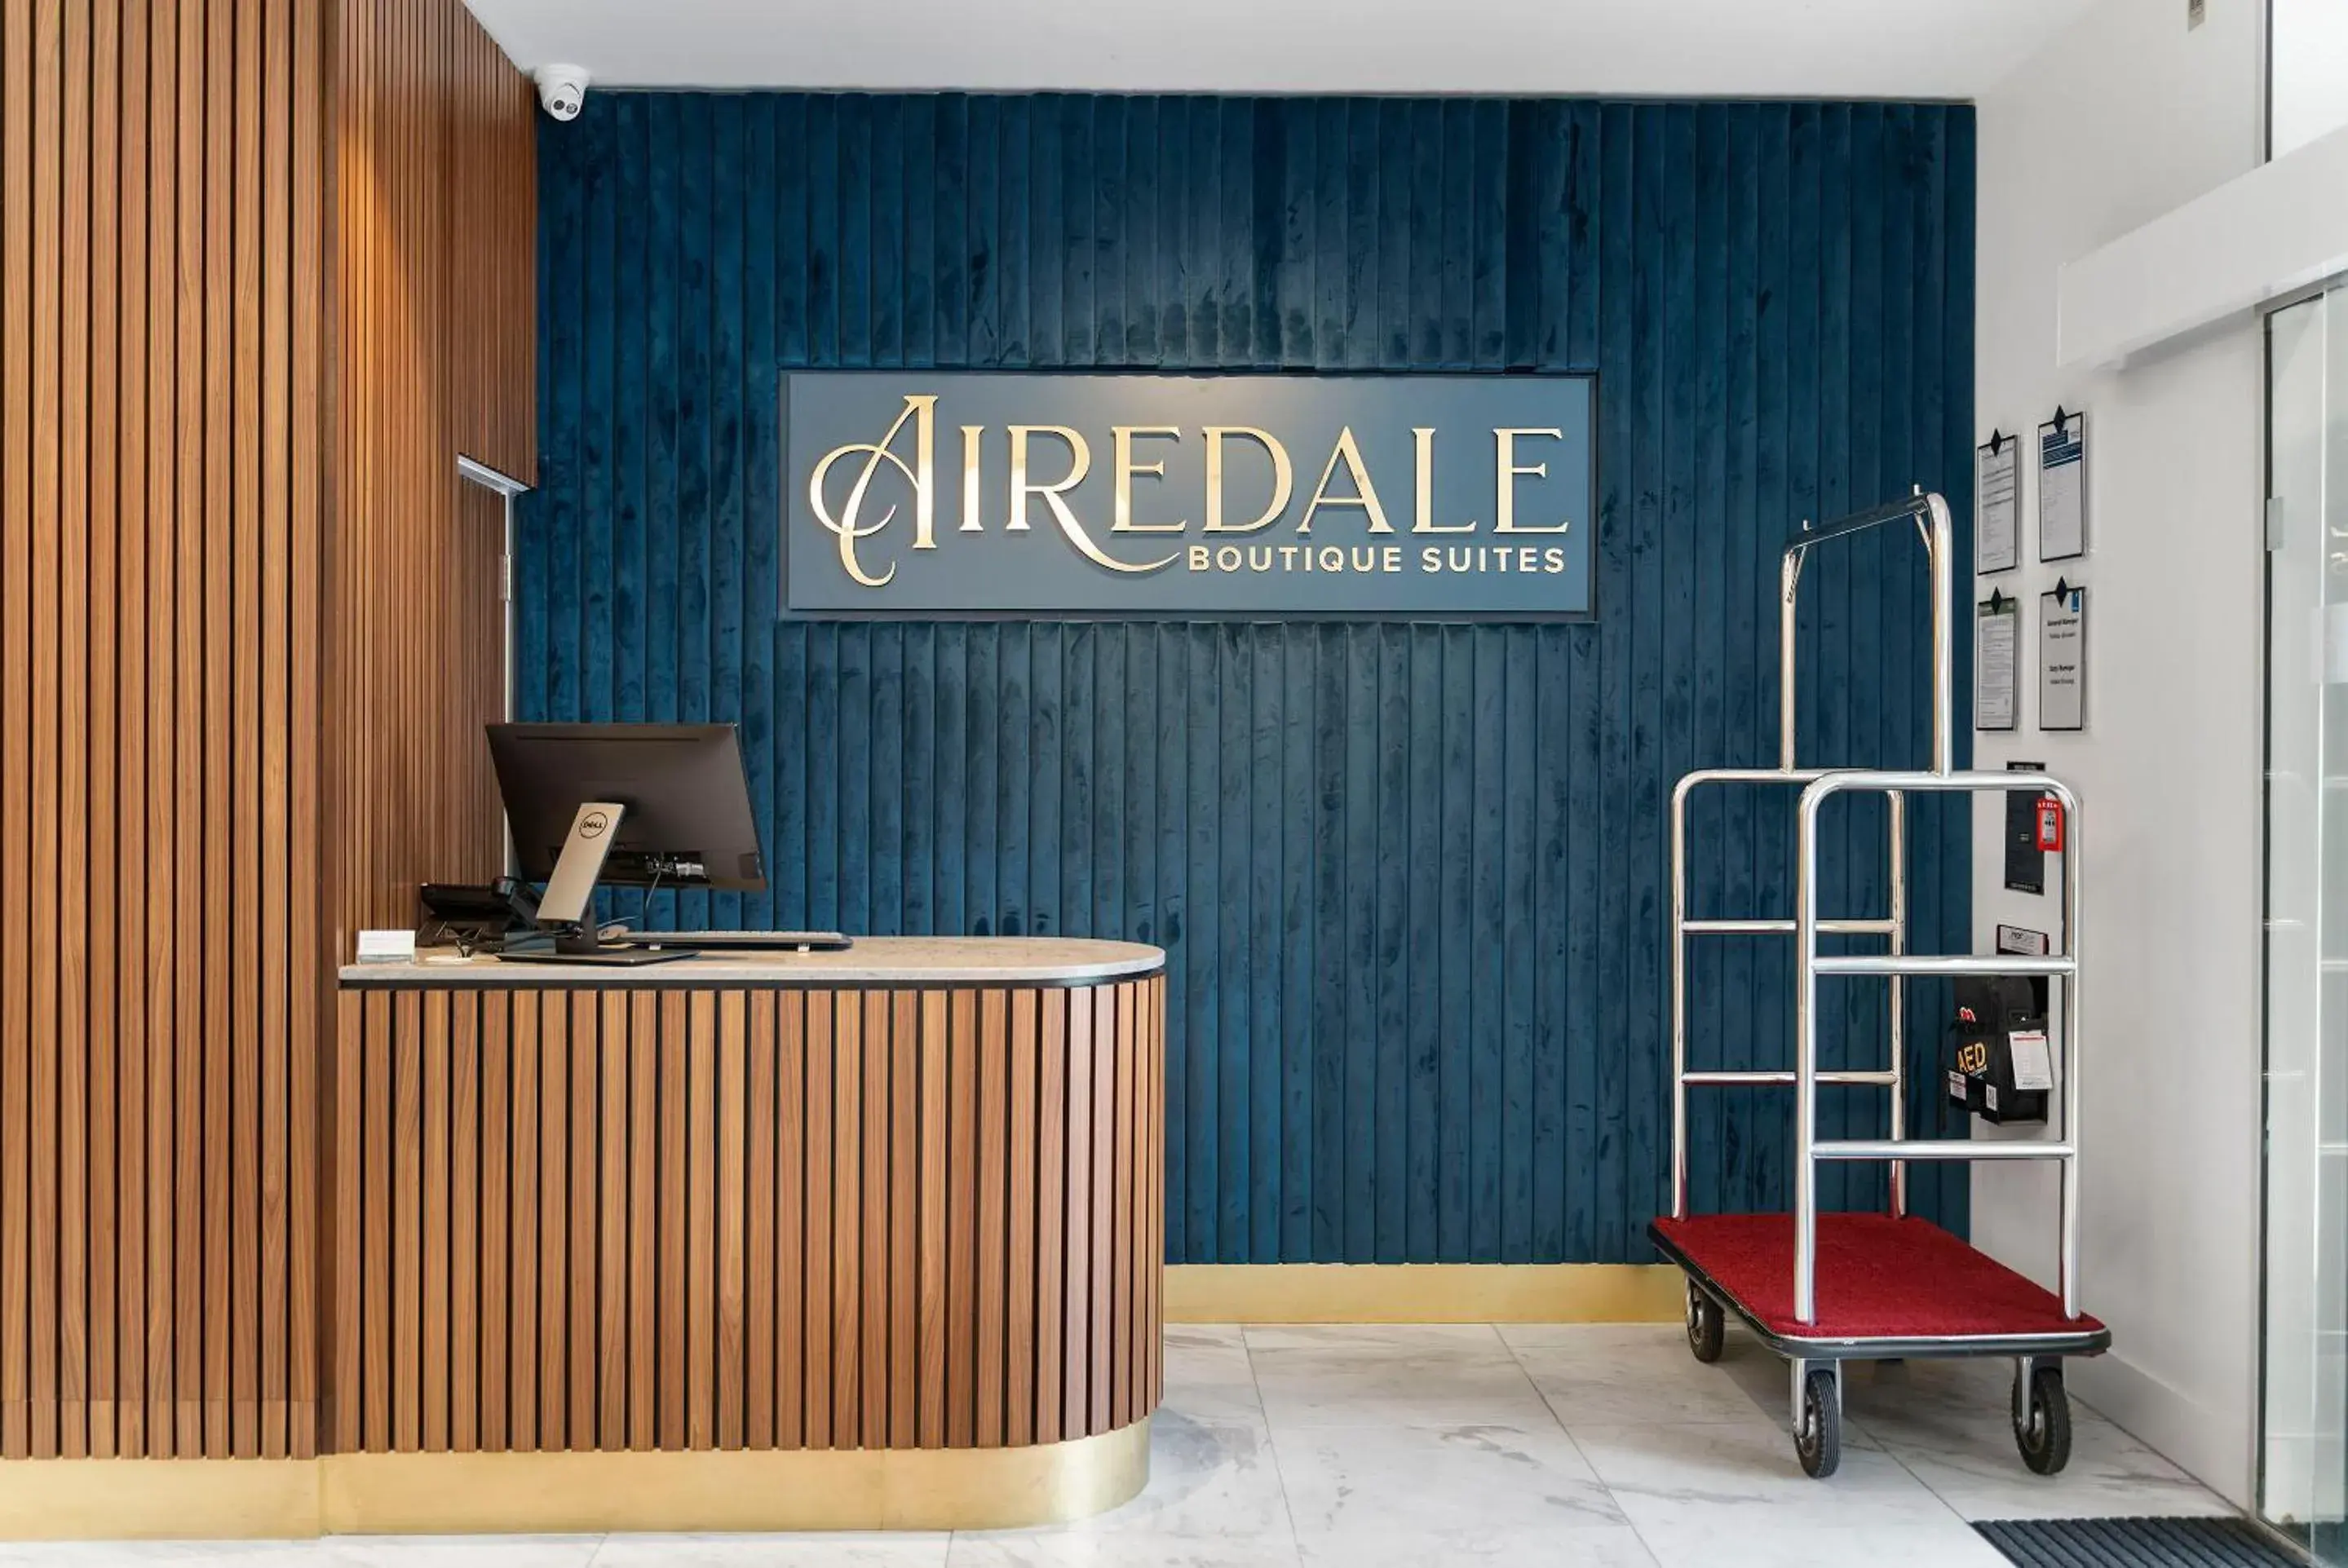 Property logo or sign in Airedale Boutique Suites